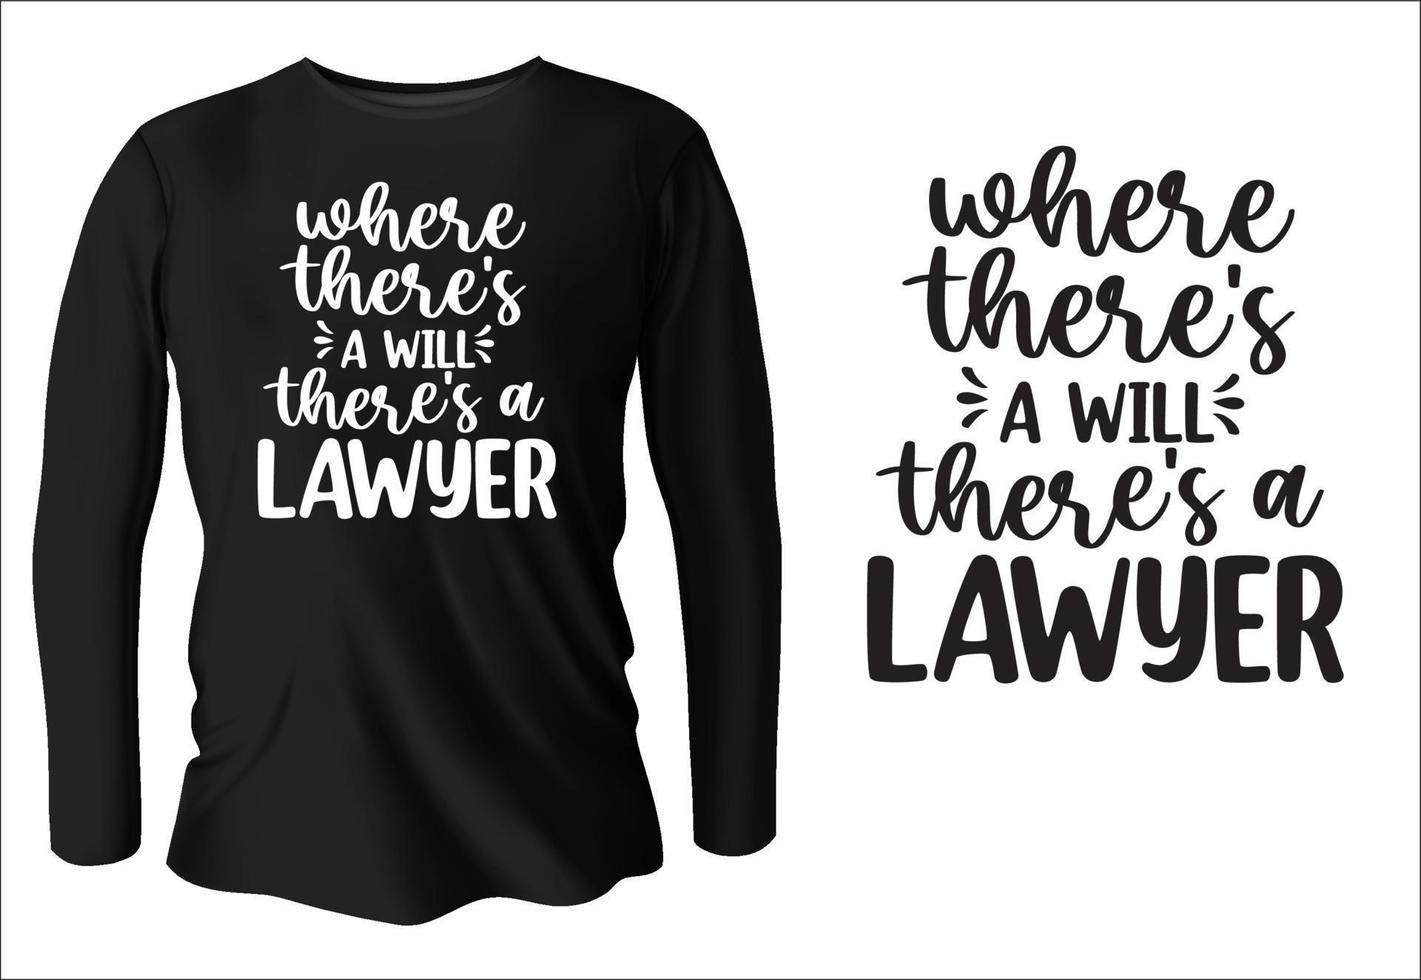 where there's a will there's a lawyer t-shirt design with vector